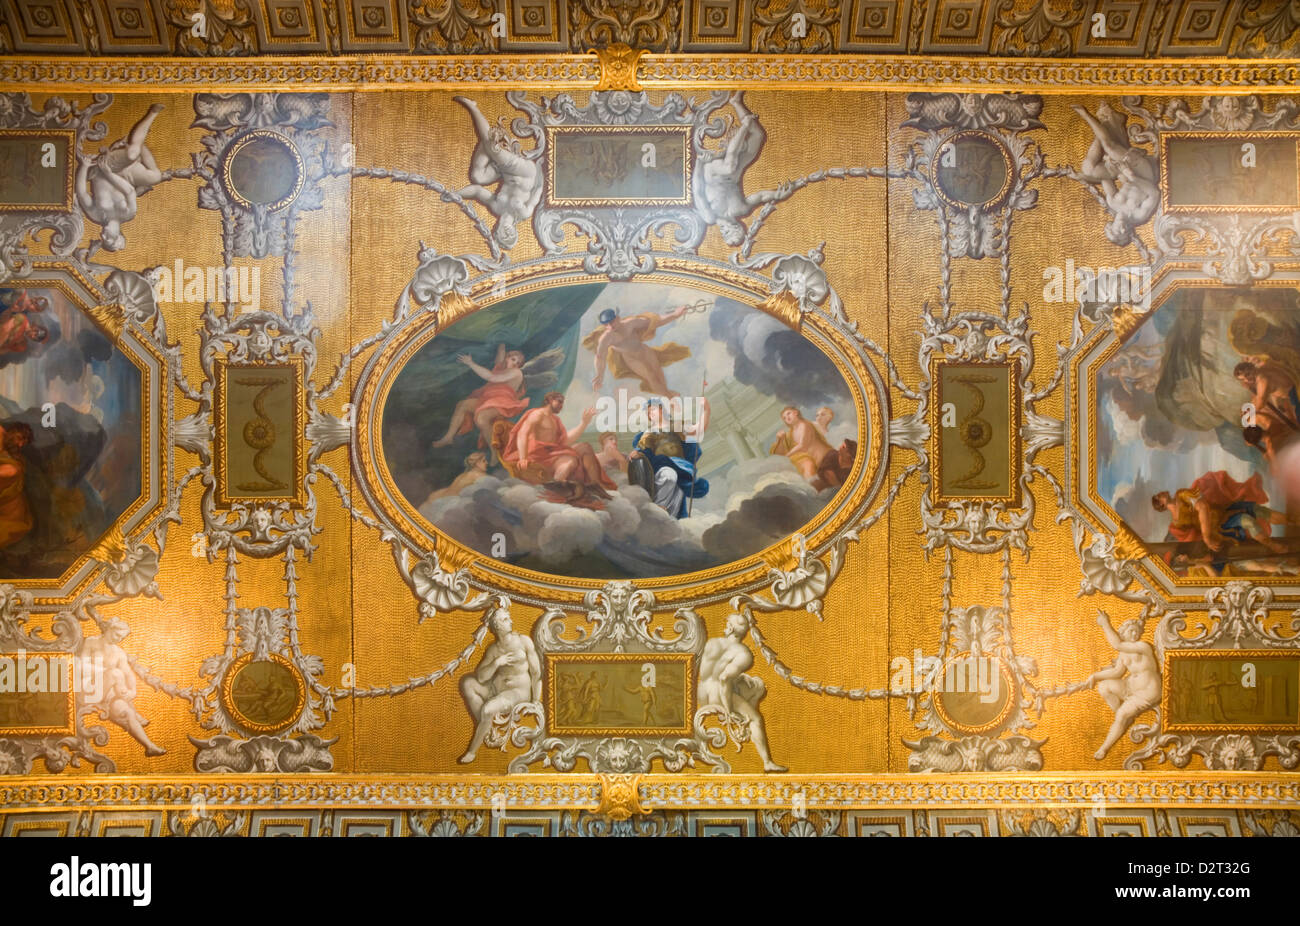 Paintings / painting decoration on the ceiling in the The Kings Gallery of Kensington Palace, London. UK. Stock Photo